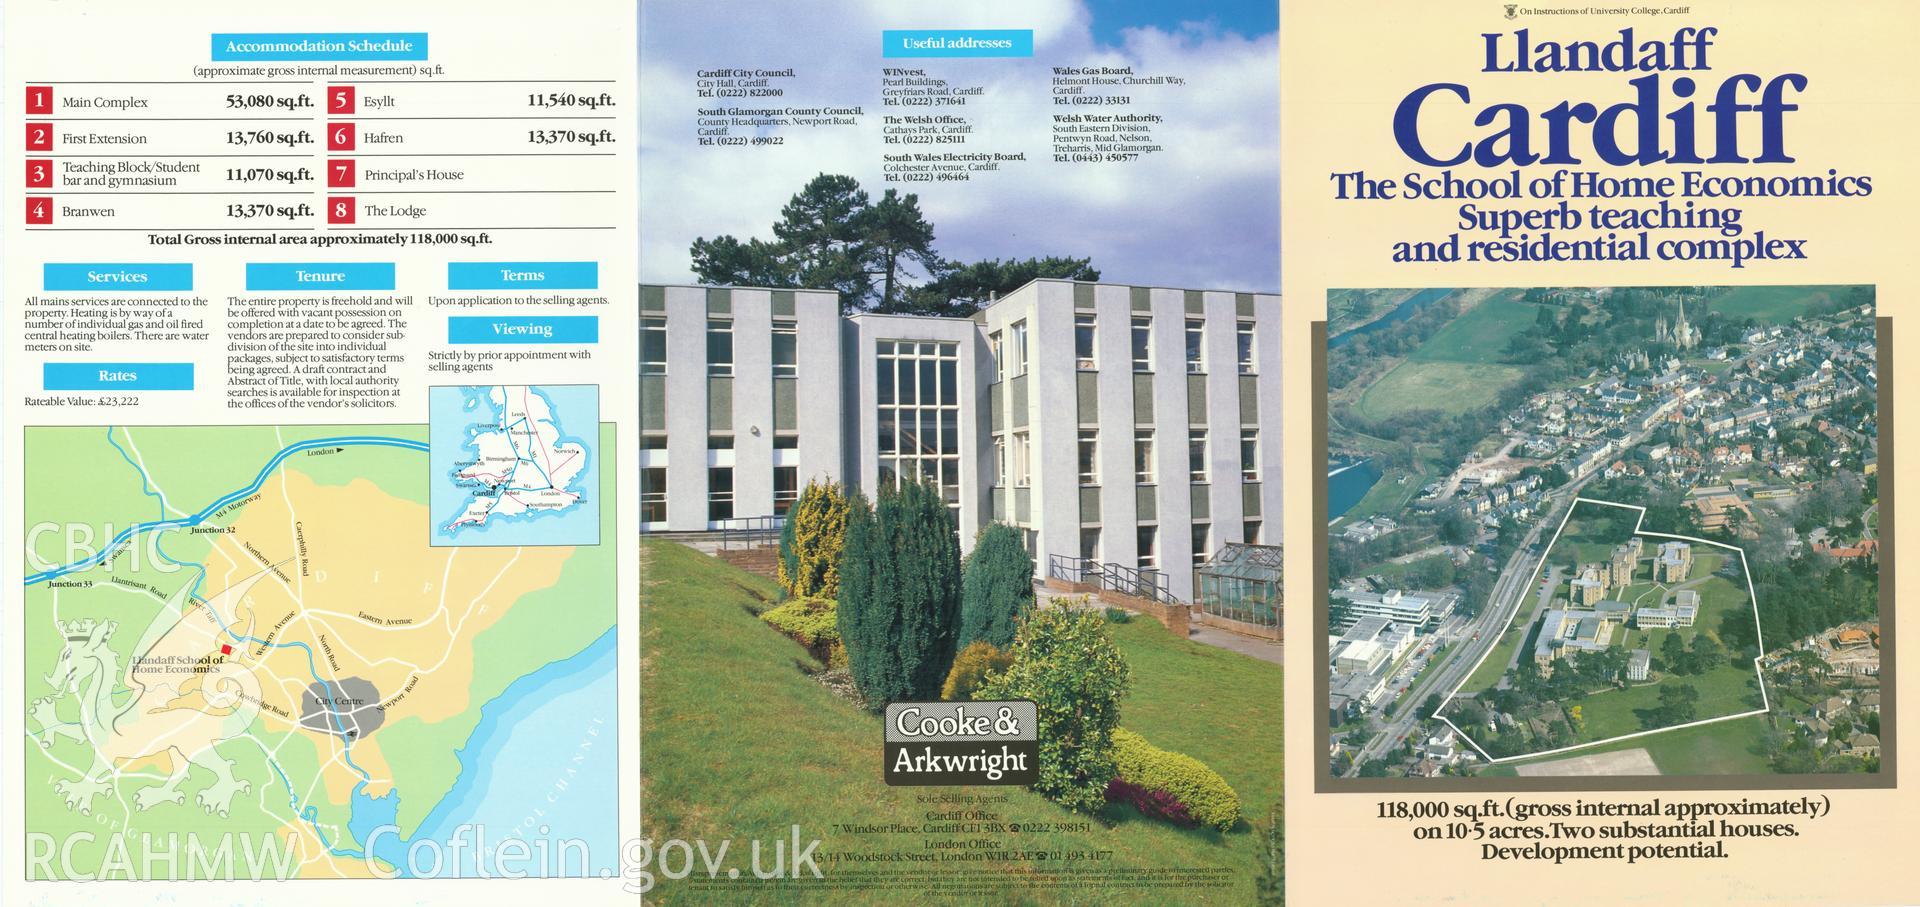 Cardiff Broadcasting House - School of Economics sales brochure by Cooke & Arkwright, undated, c 2013. (front).